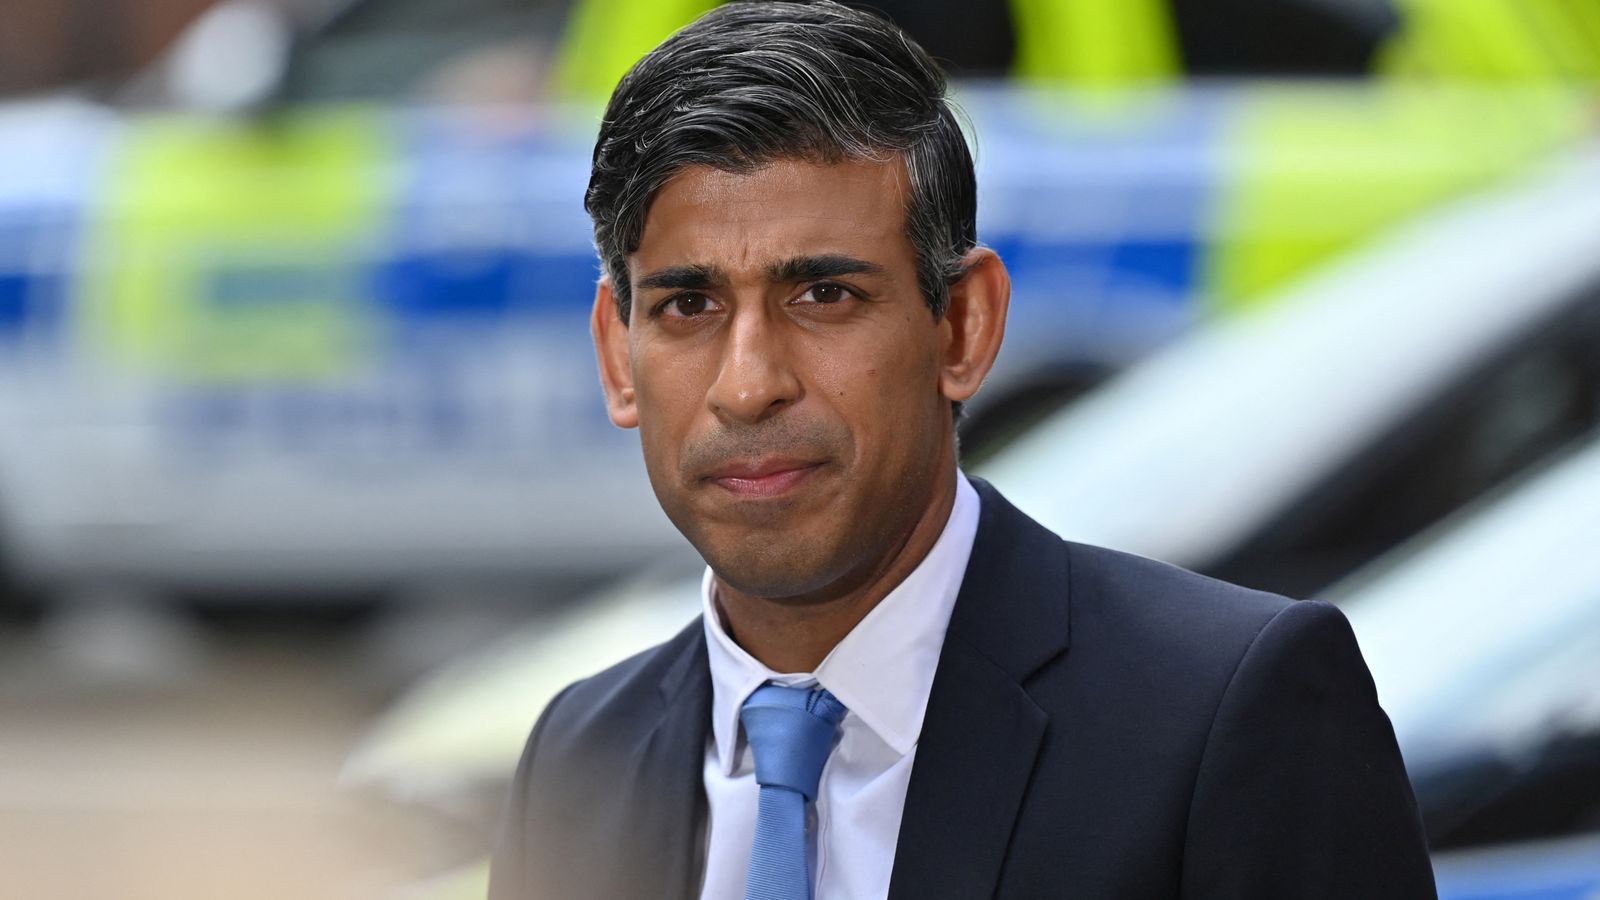 Rishi Sunak's close protection officer arrested and suspended over alleged bets on election date